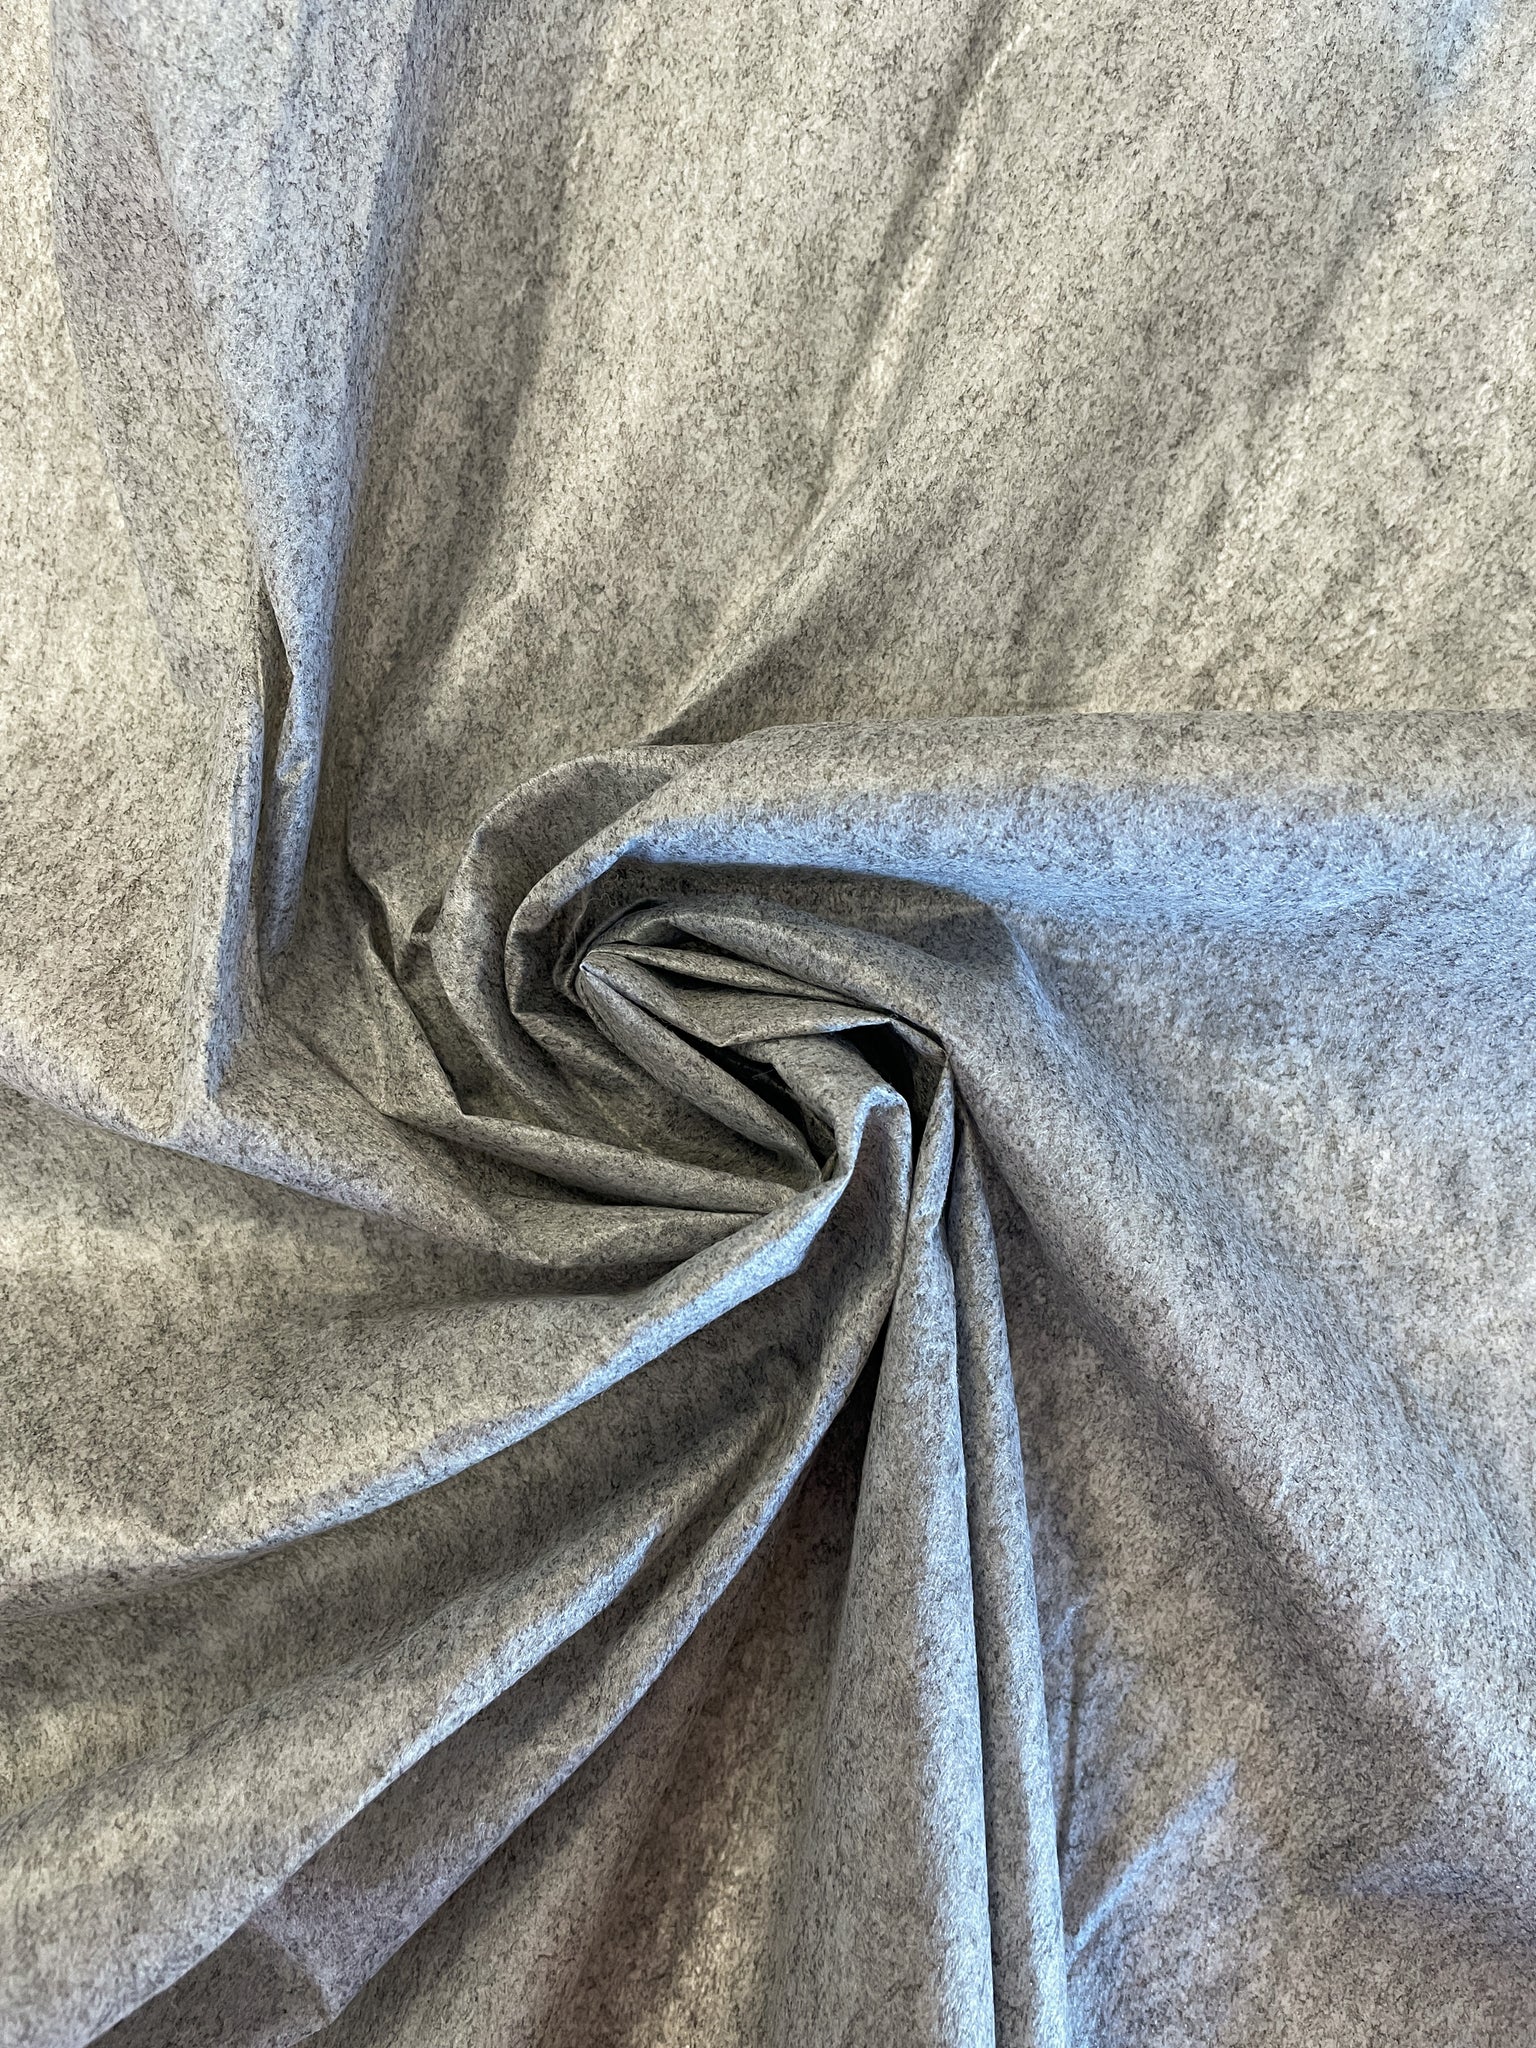 SALE Polyester Non-Woven Sew-In Interfacing - Gray